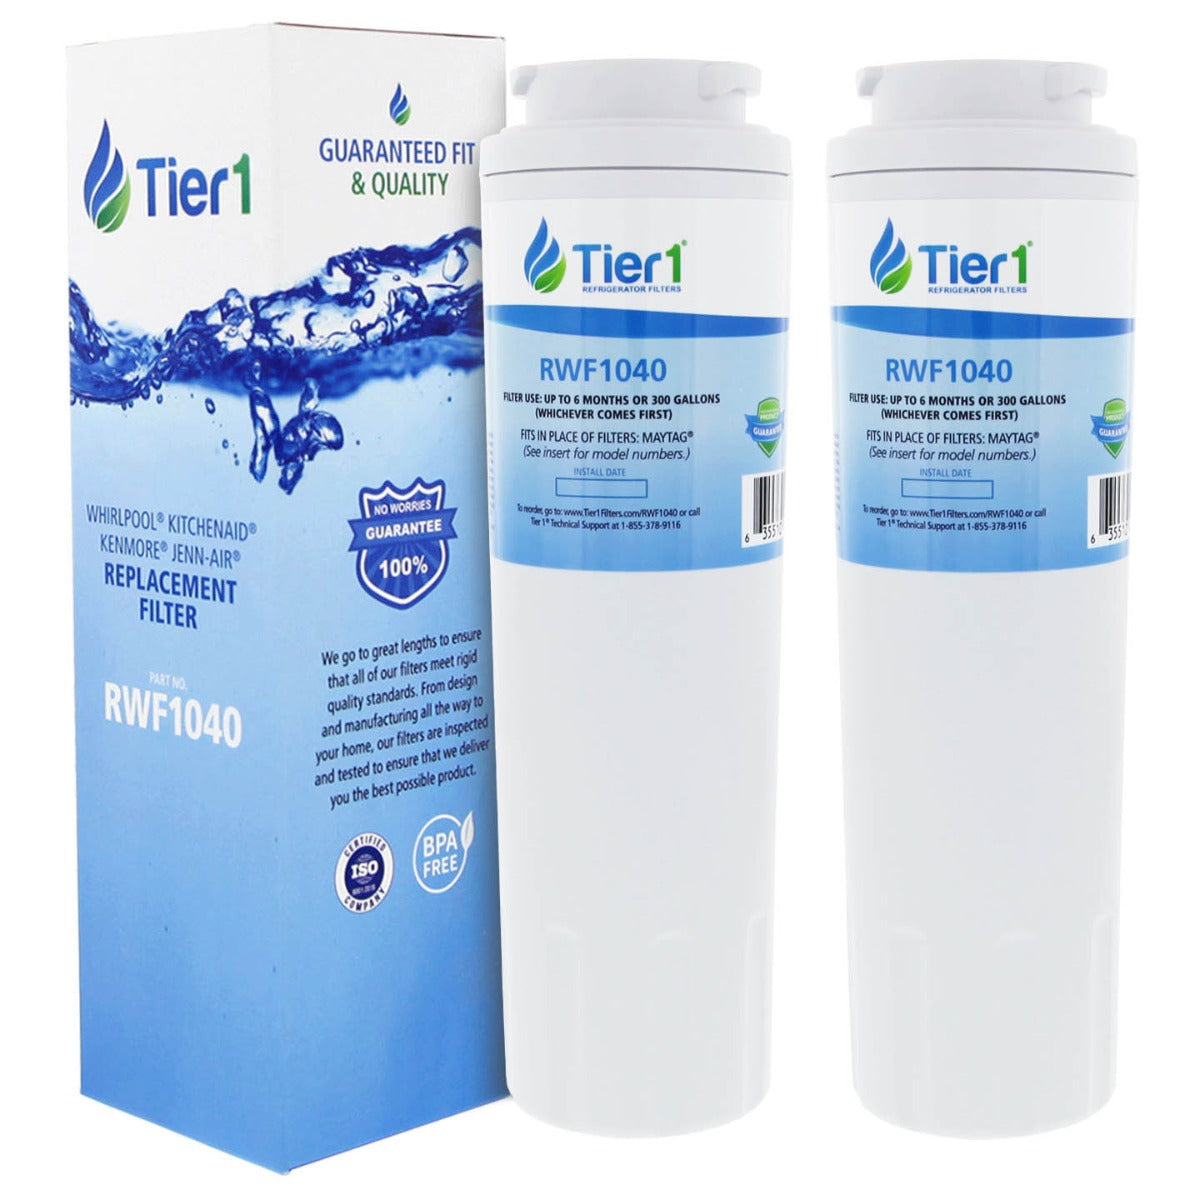 Tier1 EveryDrop EDR4RXD1 Maytag UKF8001 Refrigerator Water Filter Replacement Comparable